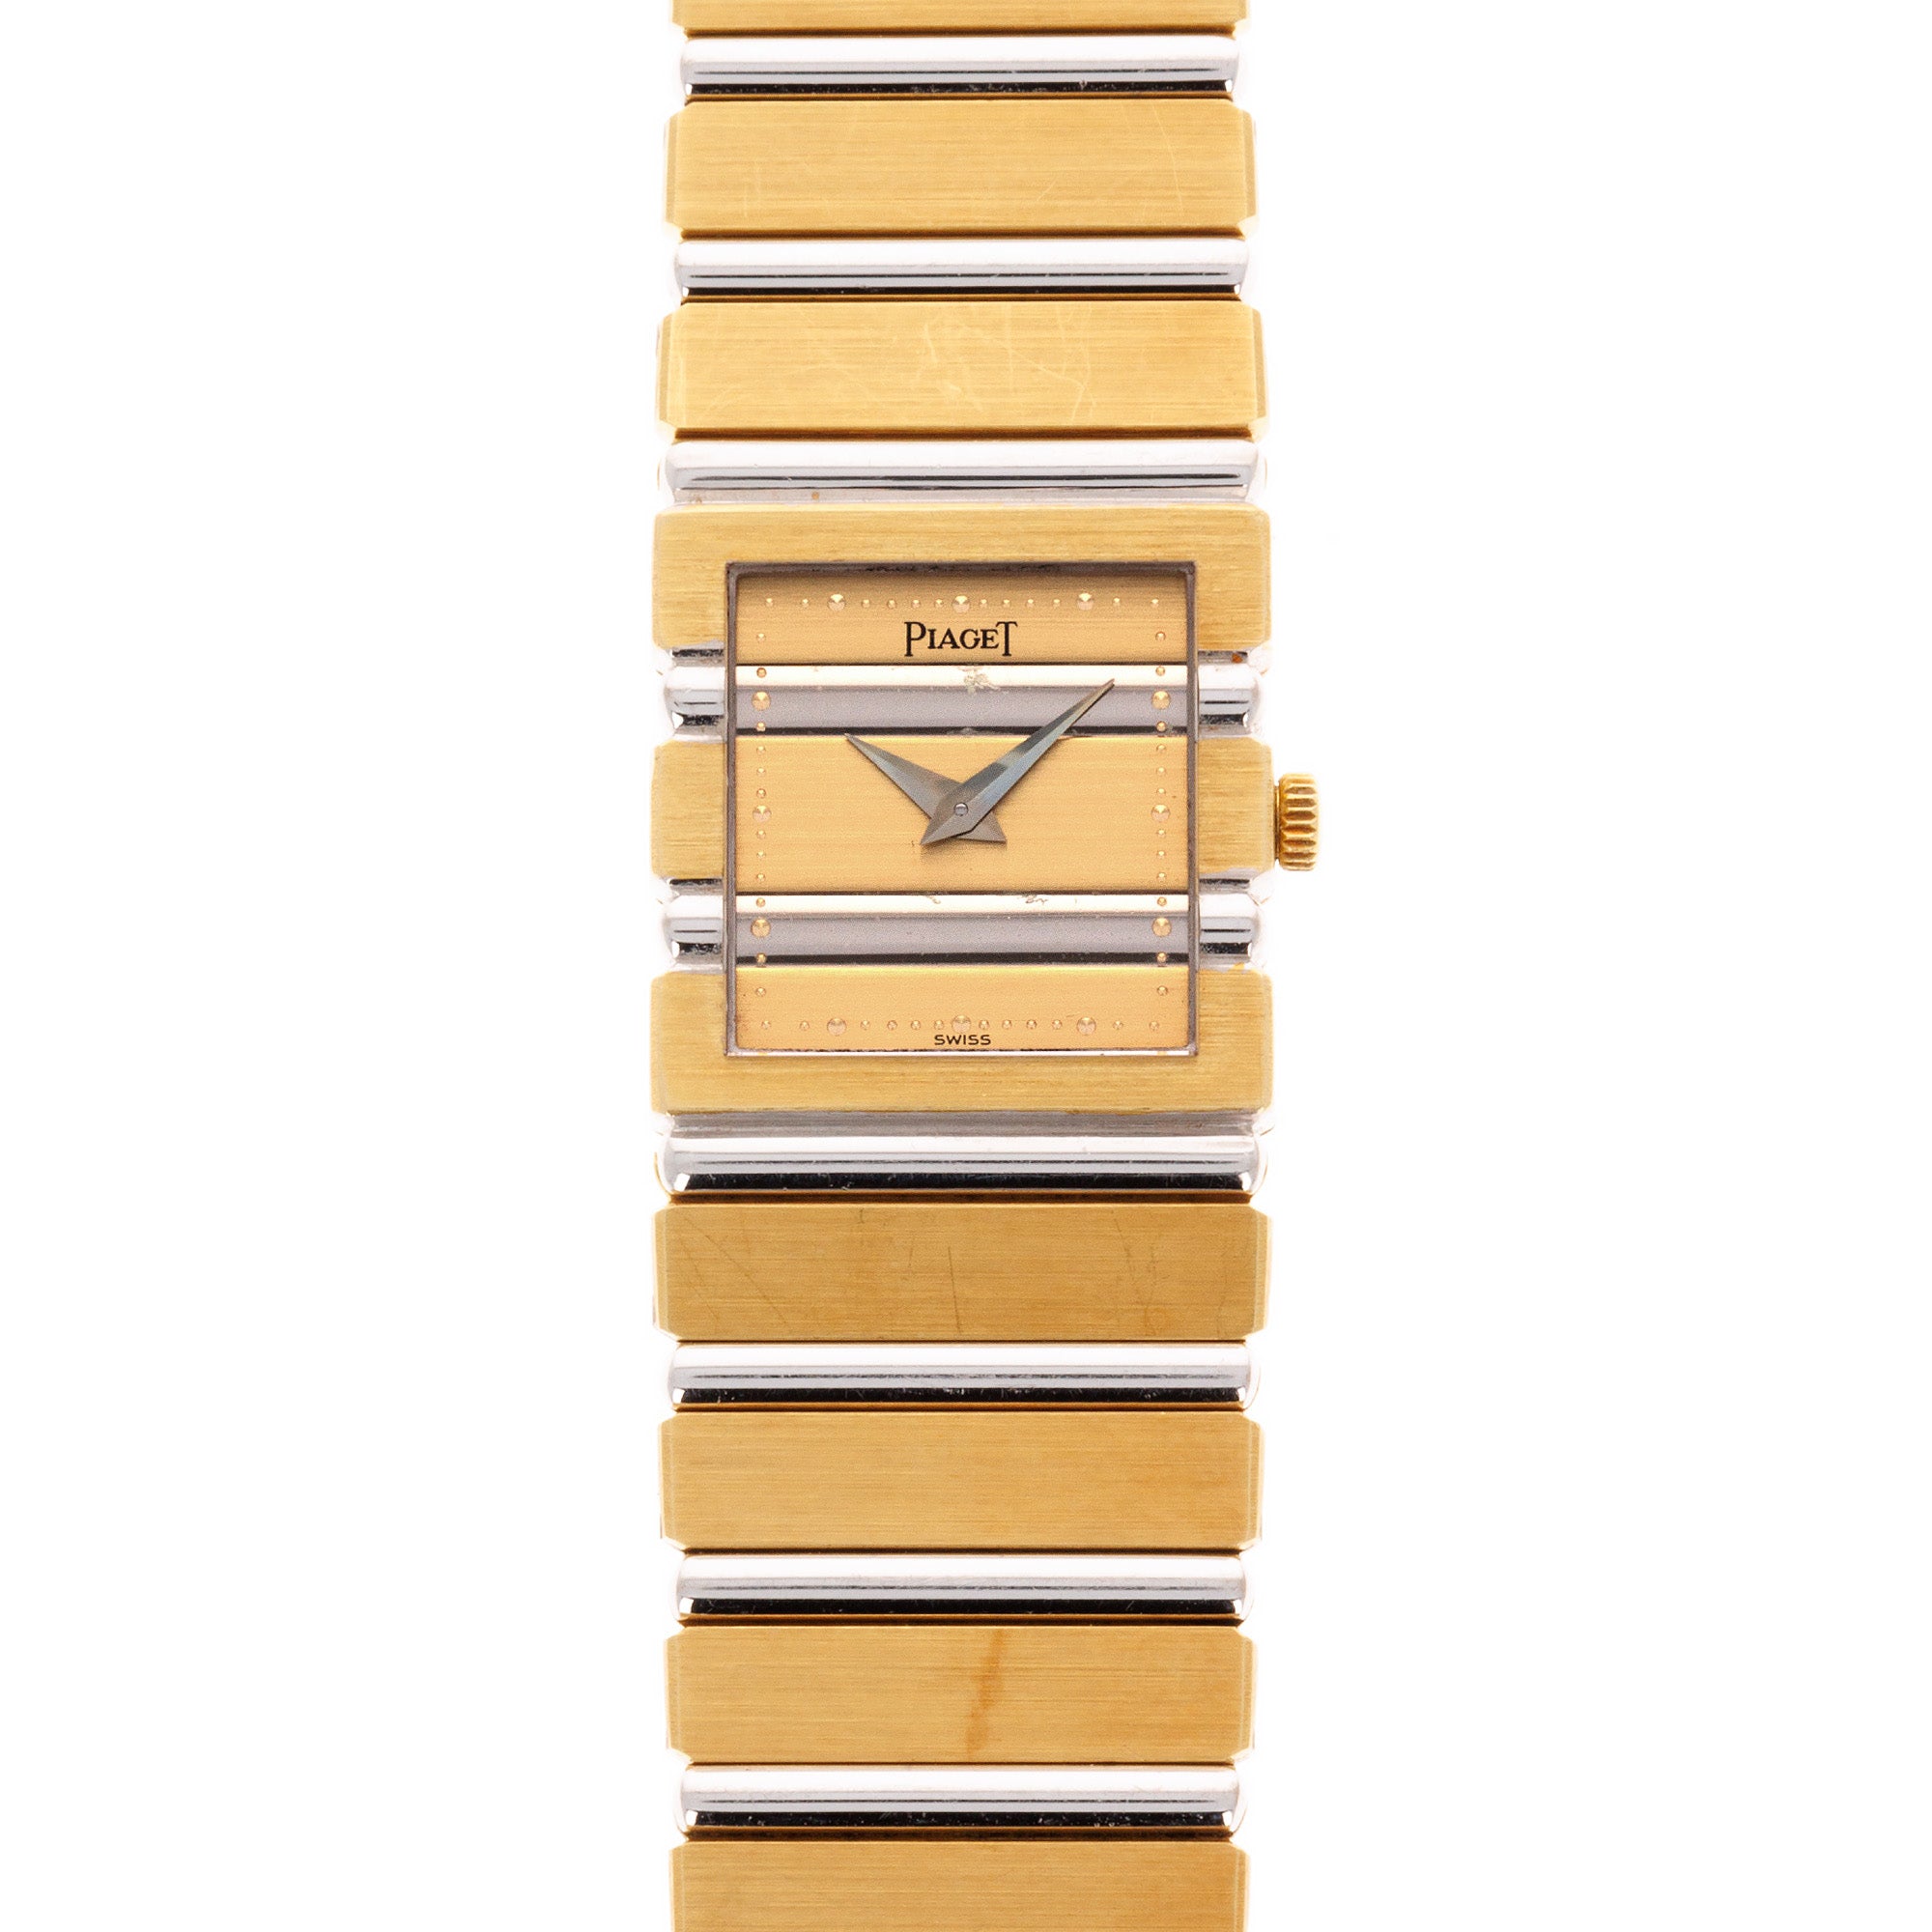 Piaget - Piaget Yellow & White Gold Polo Watch Ref. 8131 - The Keystone Watches